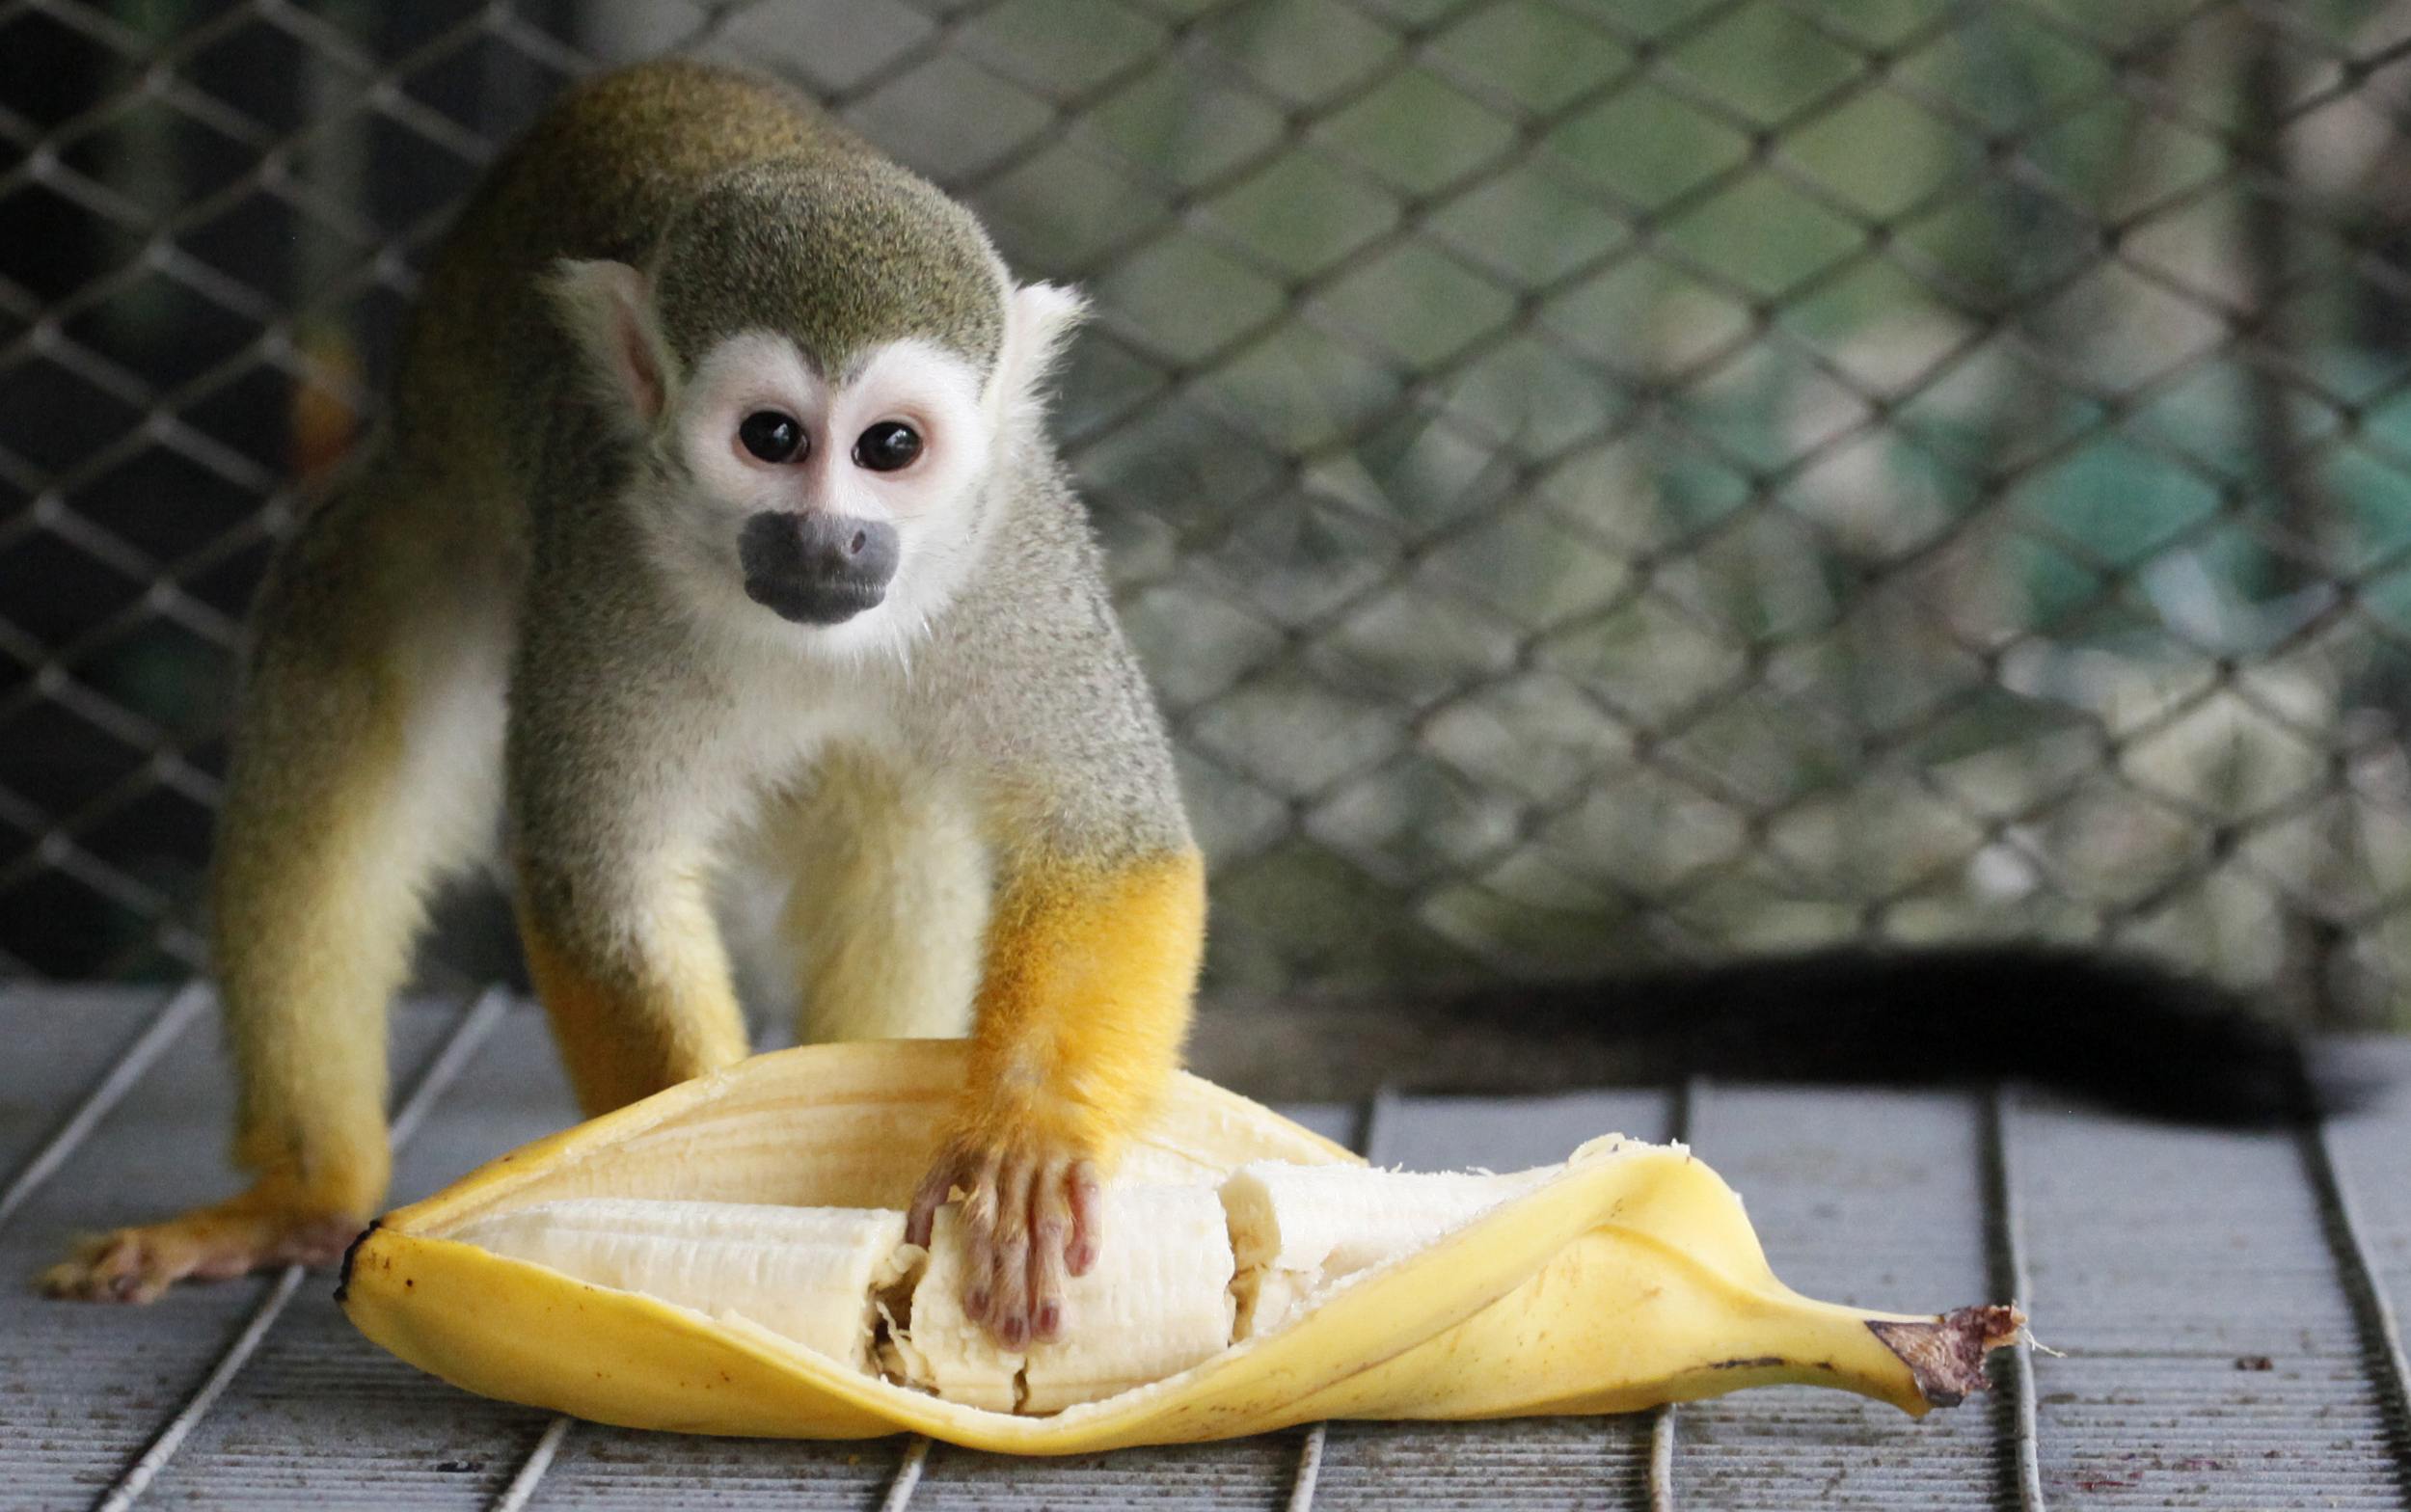 Zoo bans monkeys from eating bananas as it's 'equivalent to giving them  cake'